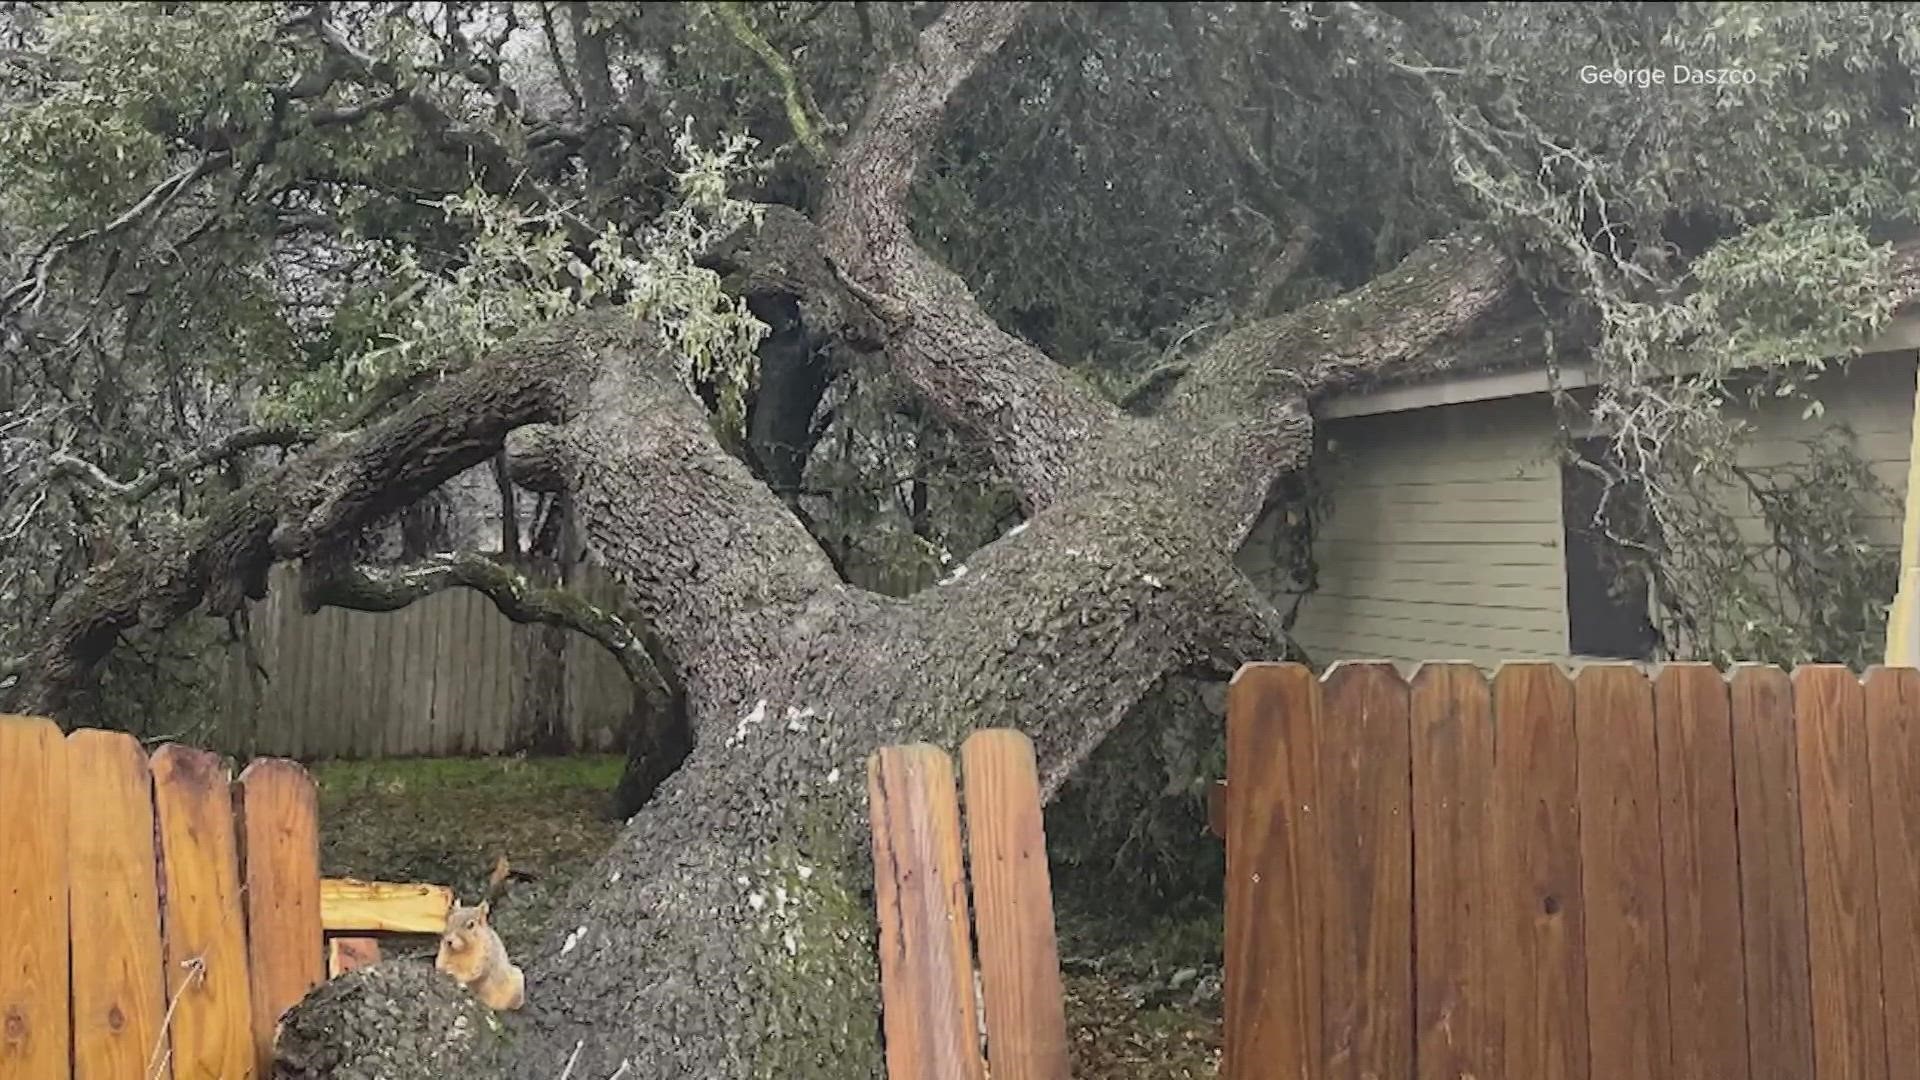 Residents are still cleaning up after this month's ice storm. But windy weather this week could affect weakened trees.